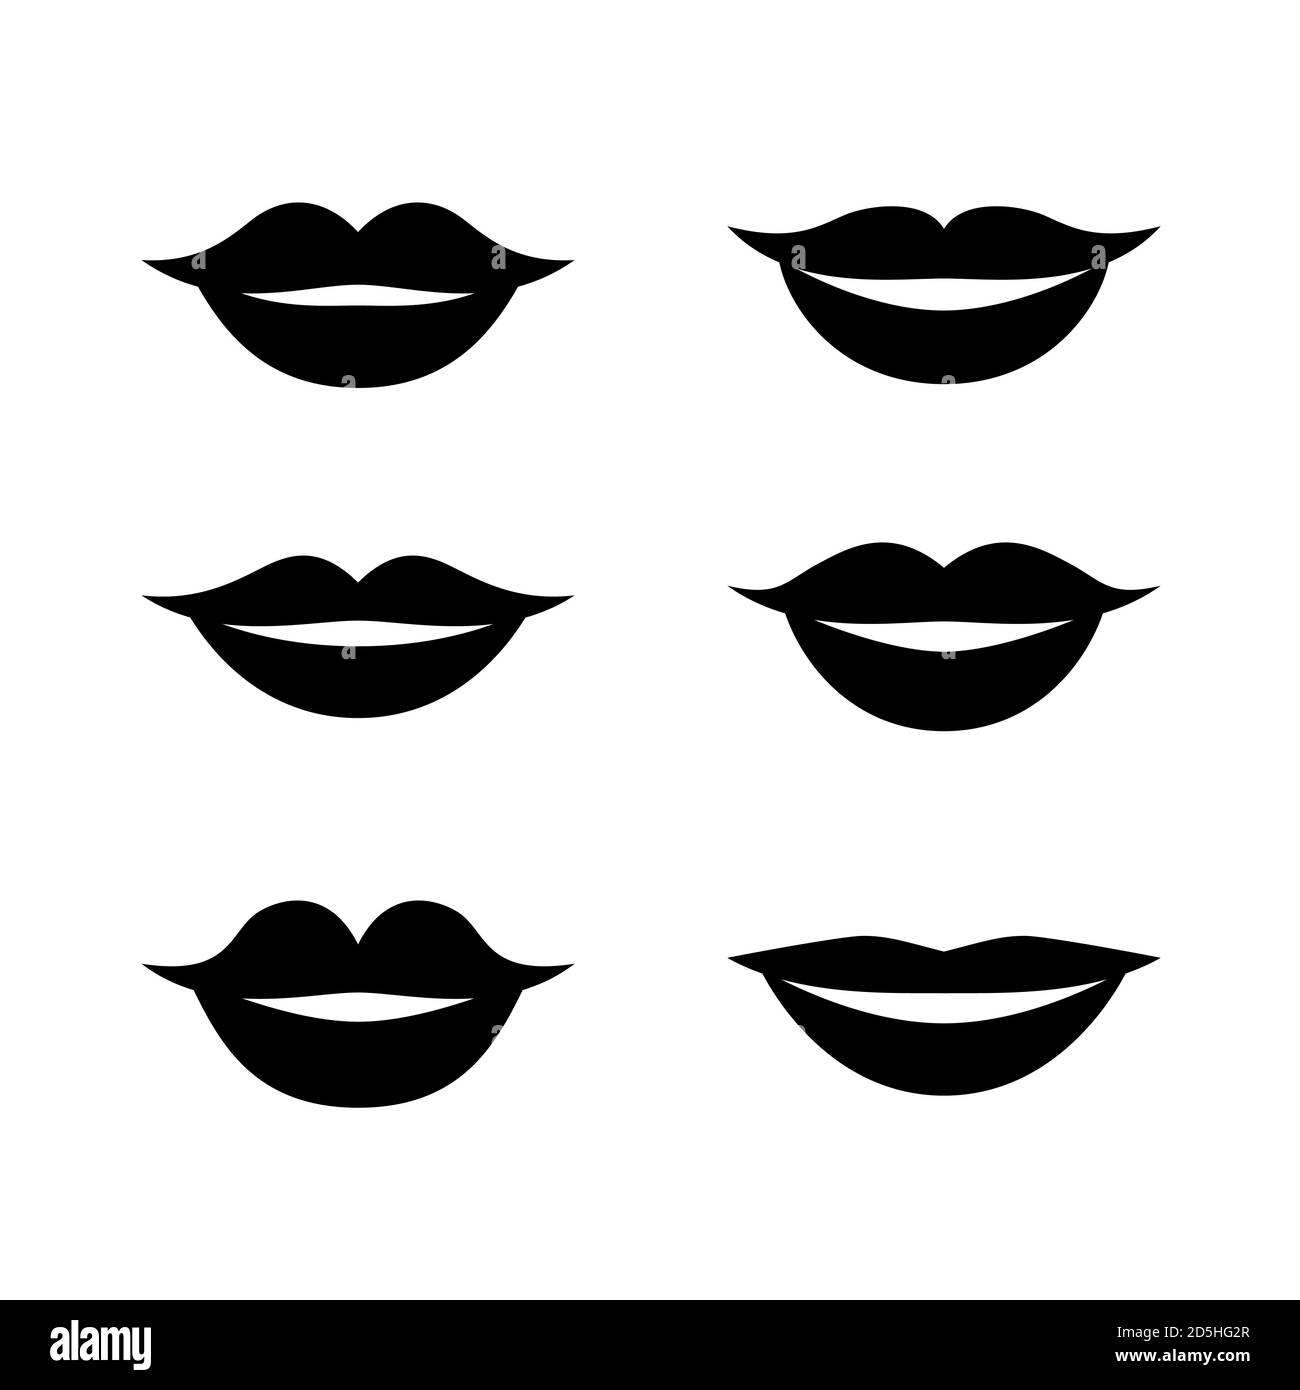 Black and white set of different male and female happy lips. Asian, European, African cartoon simple mouths, shape variations of smiles. Vector illust Stock Vector